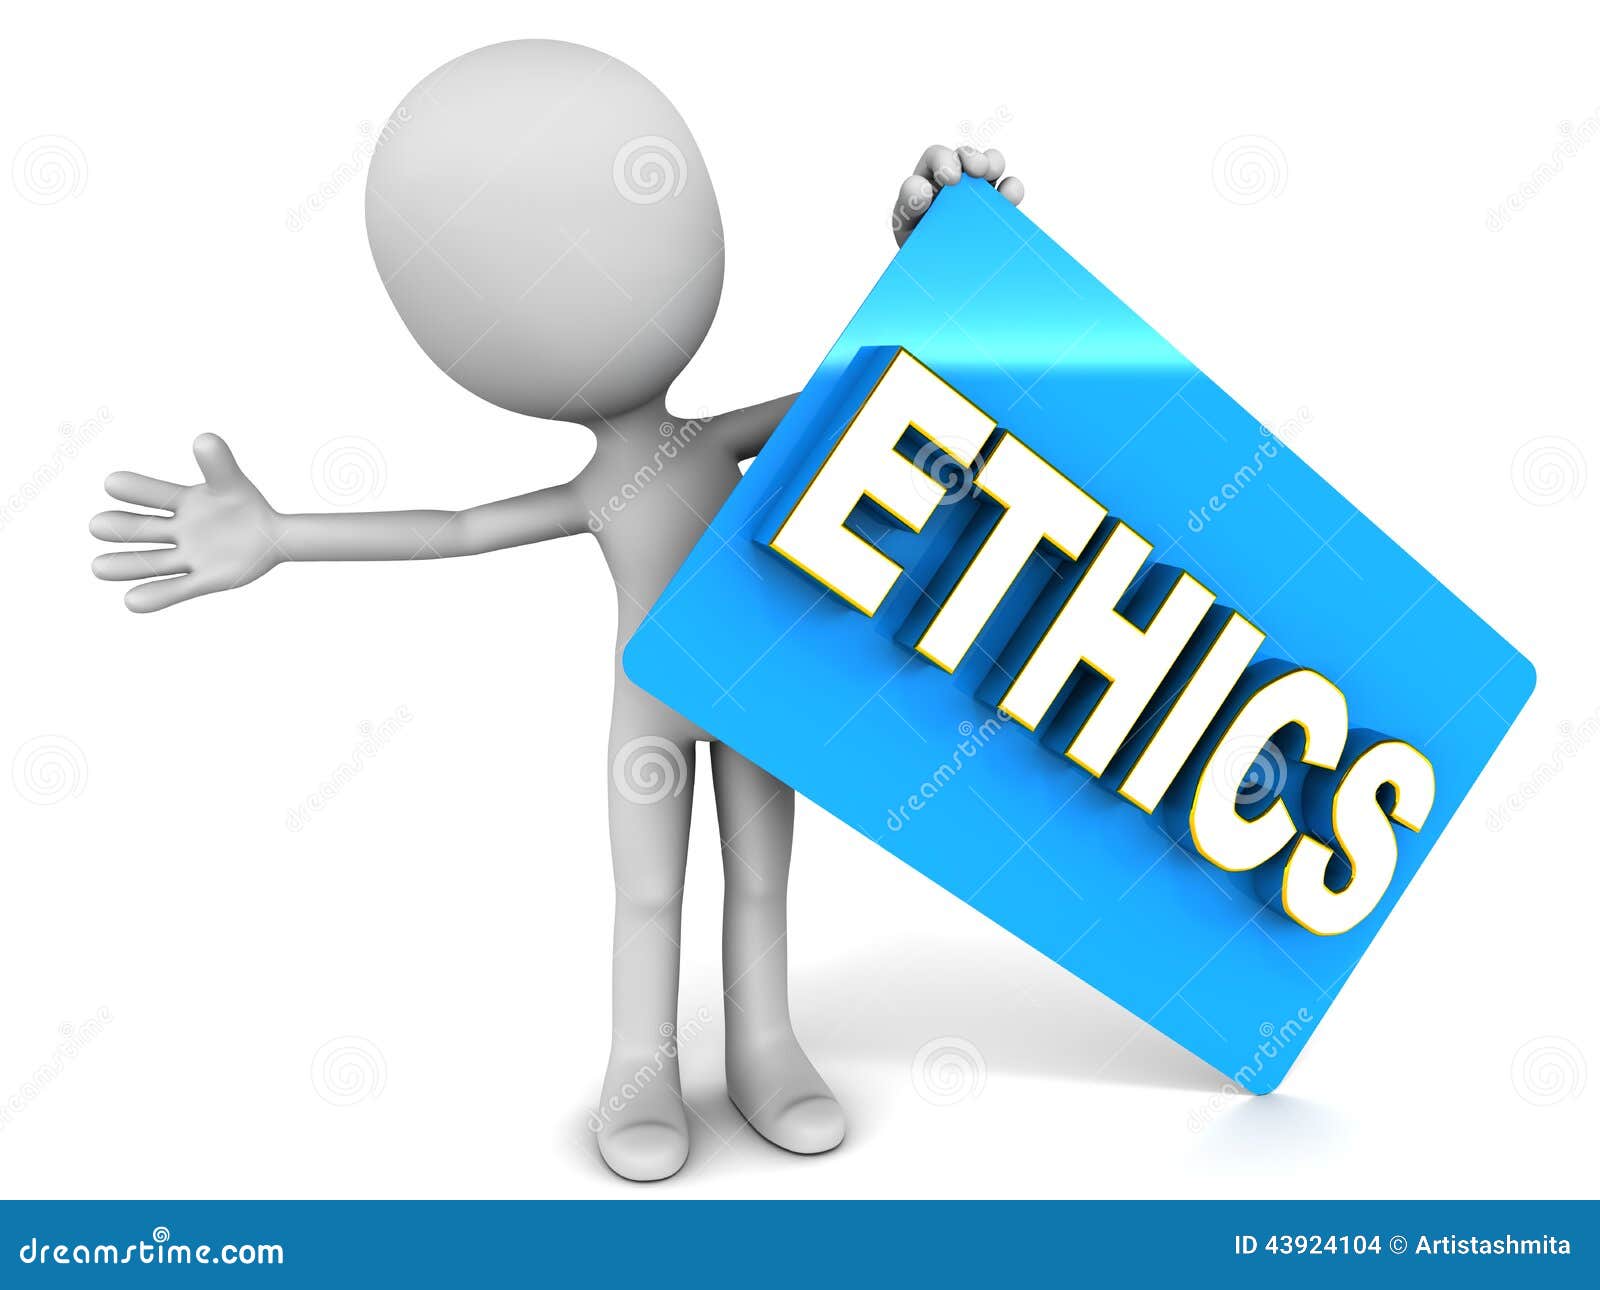 Ethics and Standards of Practice - ncihcorg